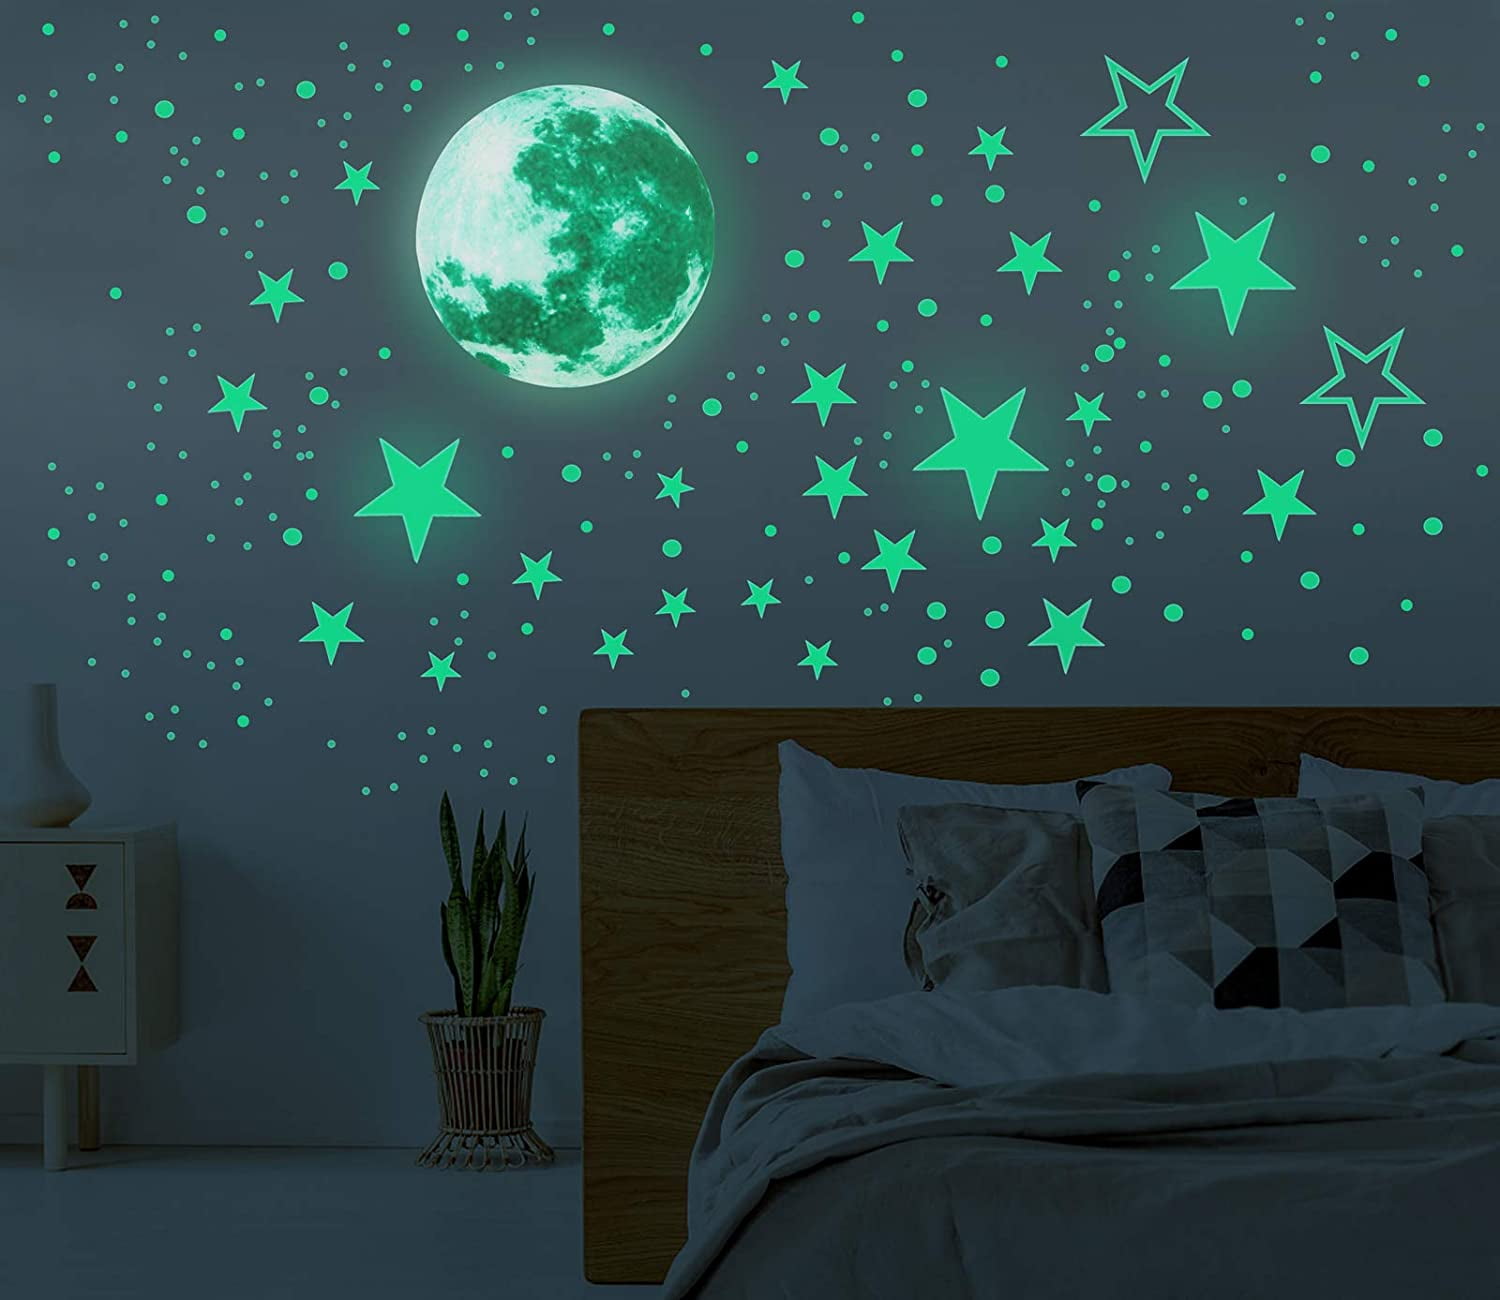 Stars & Moon Pack Night Sky Glowing Imaginations Glow in the Dark Stickers 